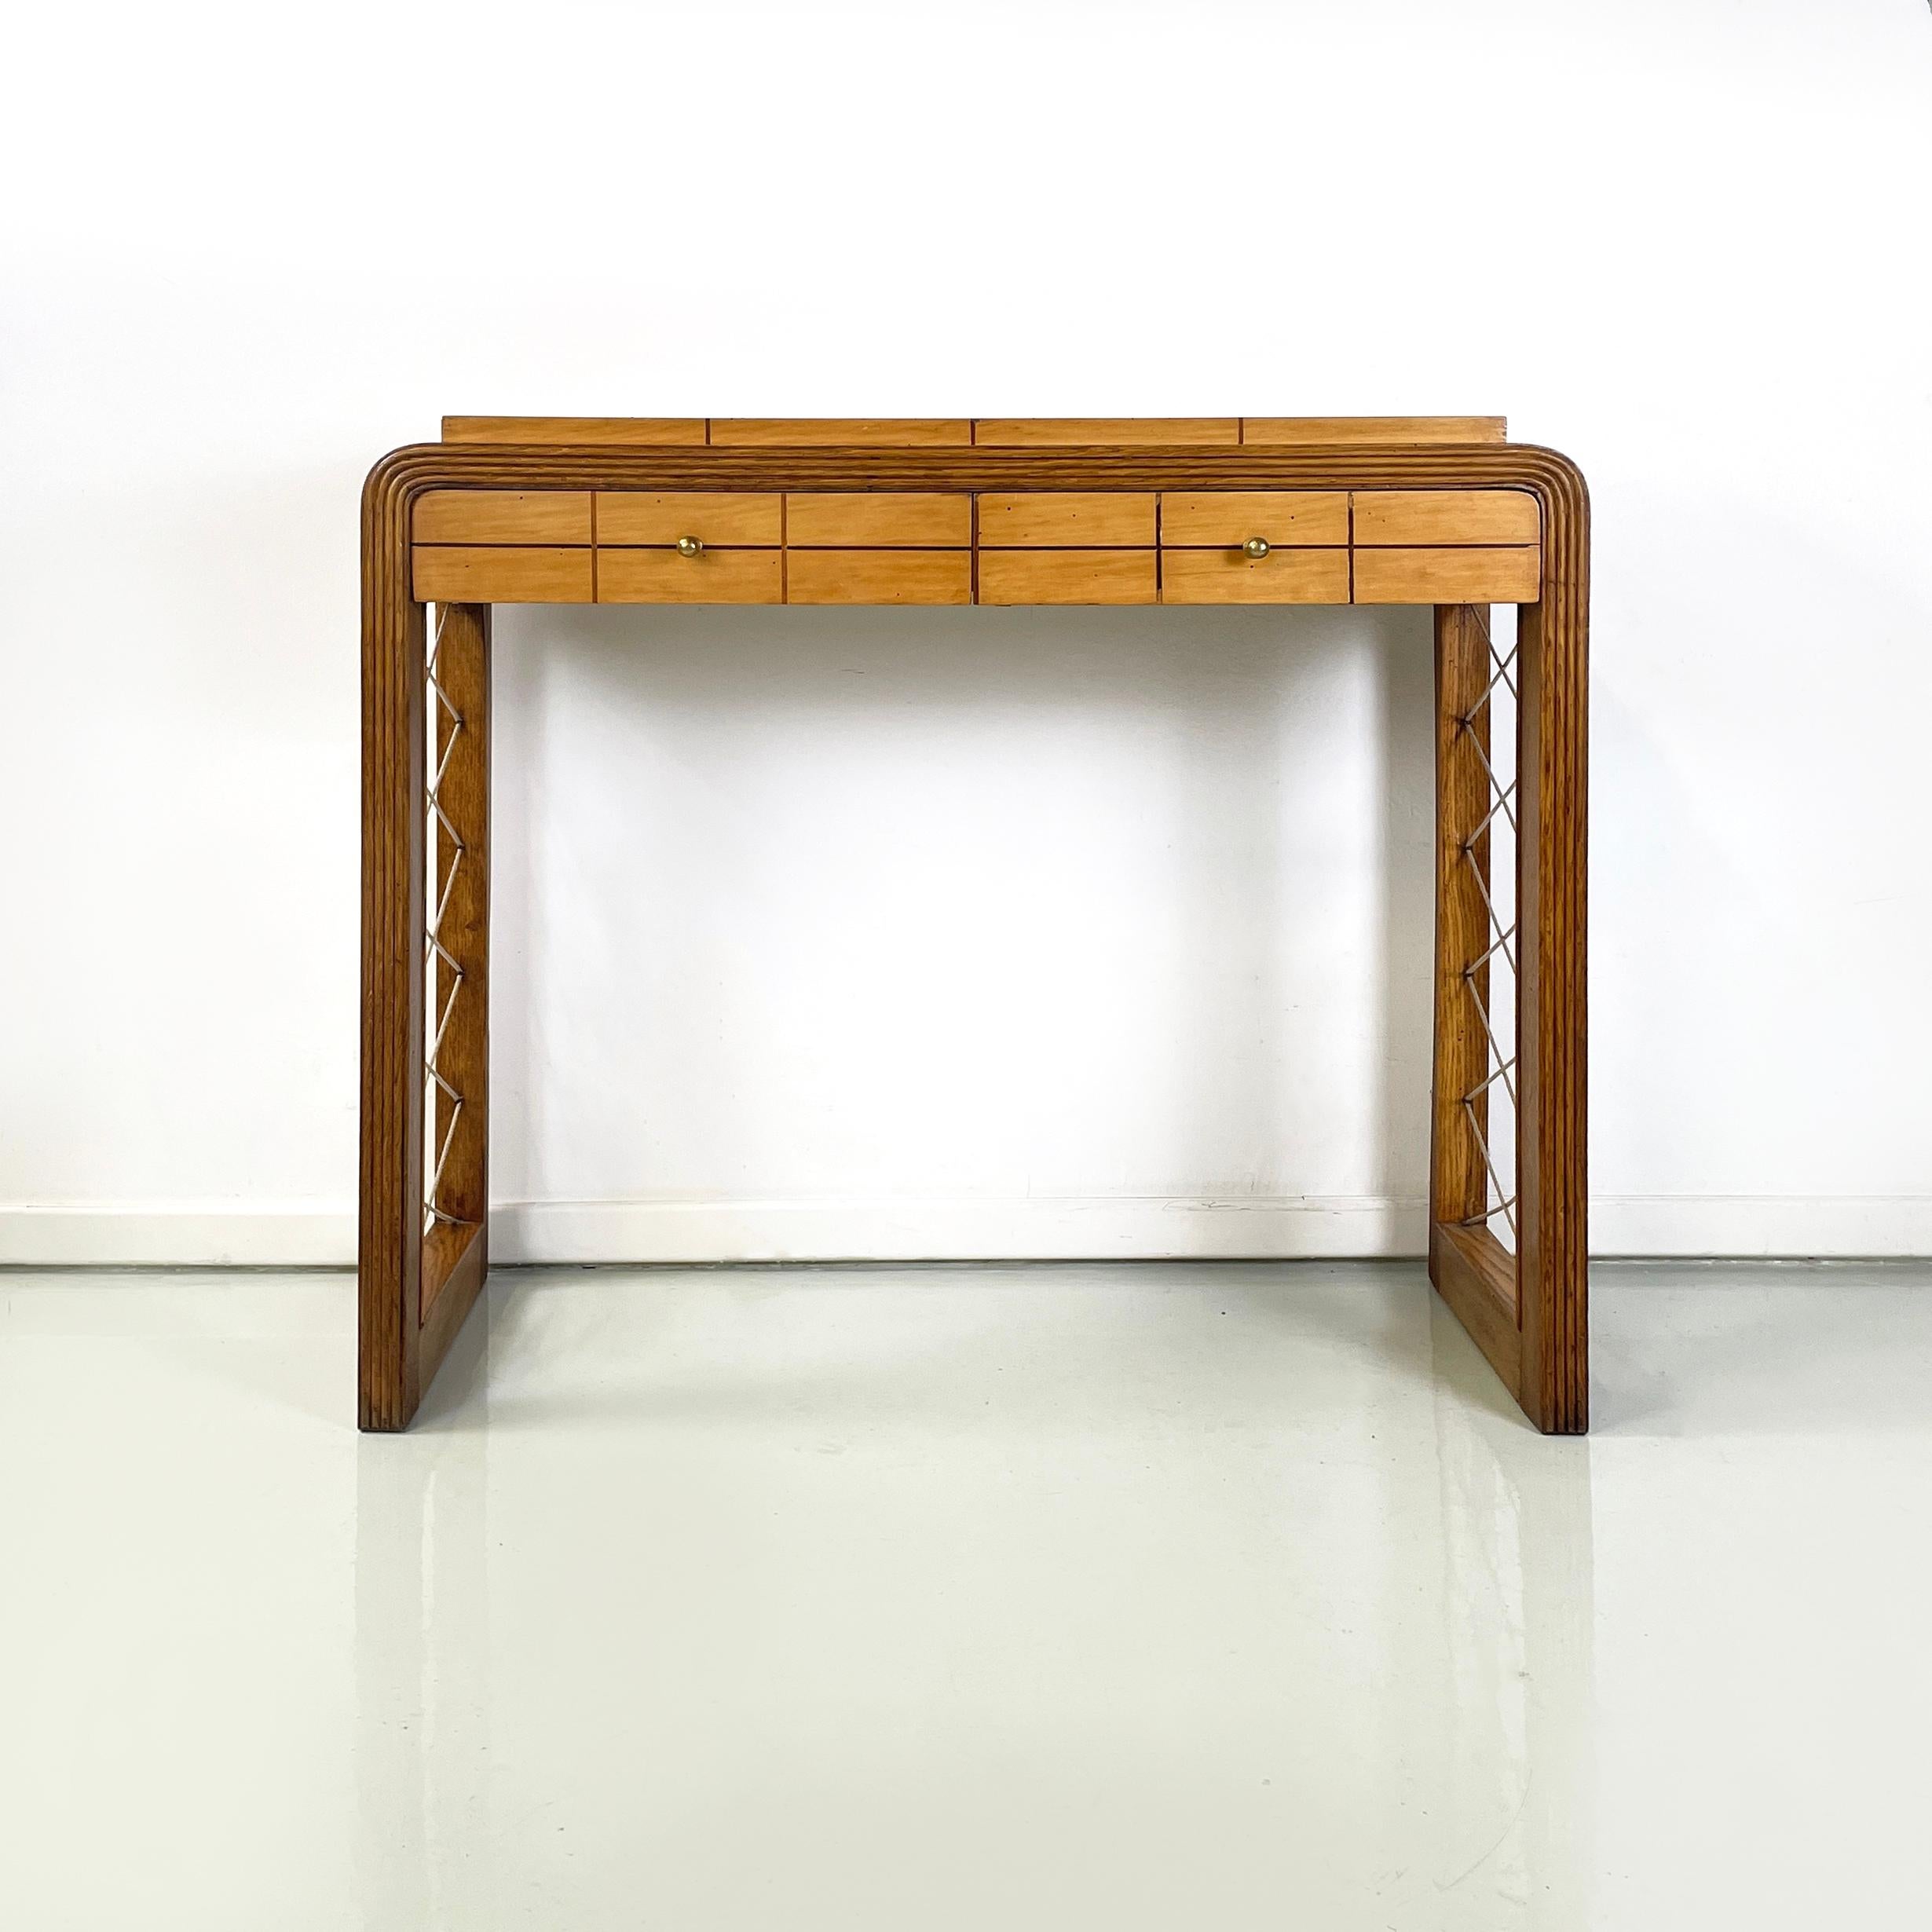 Art Deco Italian art deco Console in wood with rope geometrical details, 1950s For Sale